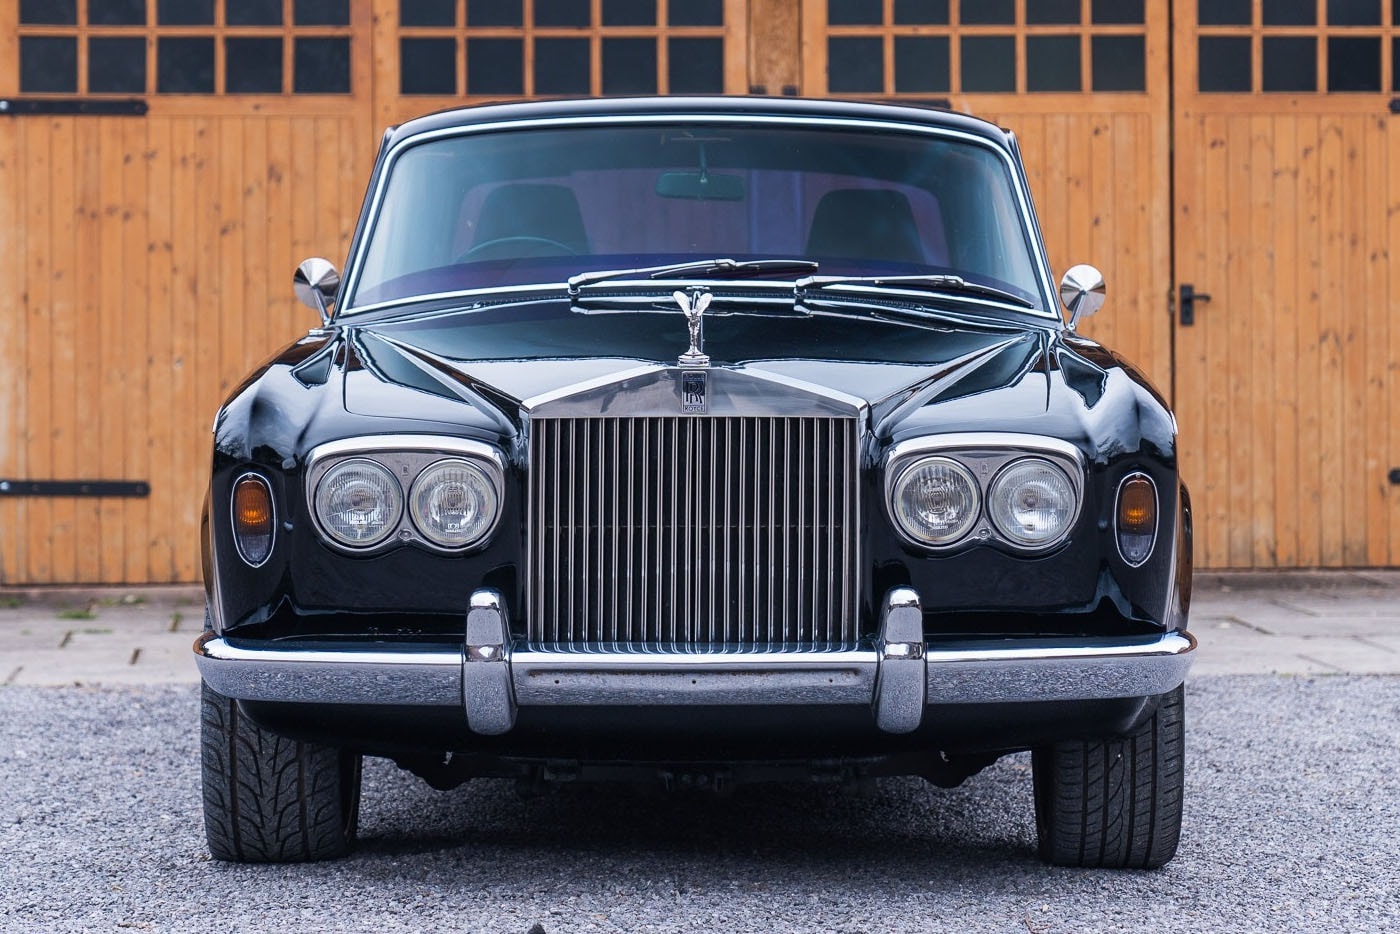 Mike Skinner The Streets Rolls-Royce Silver Shadow The Hardest Way To Make An Easy Living Tuned Custom British Classic Car Auction